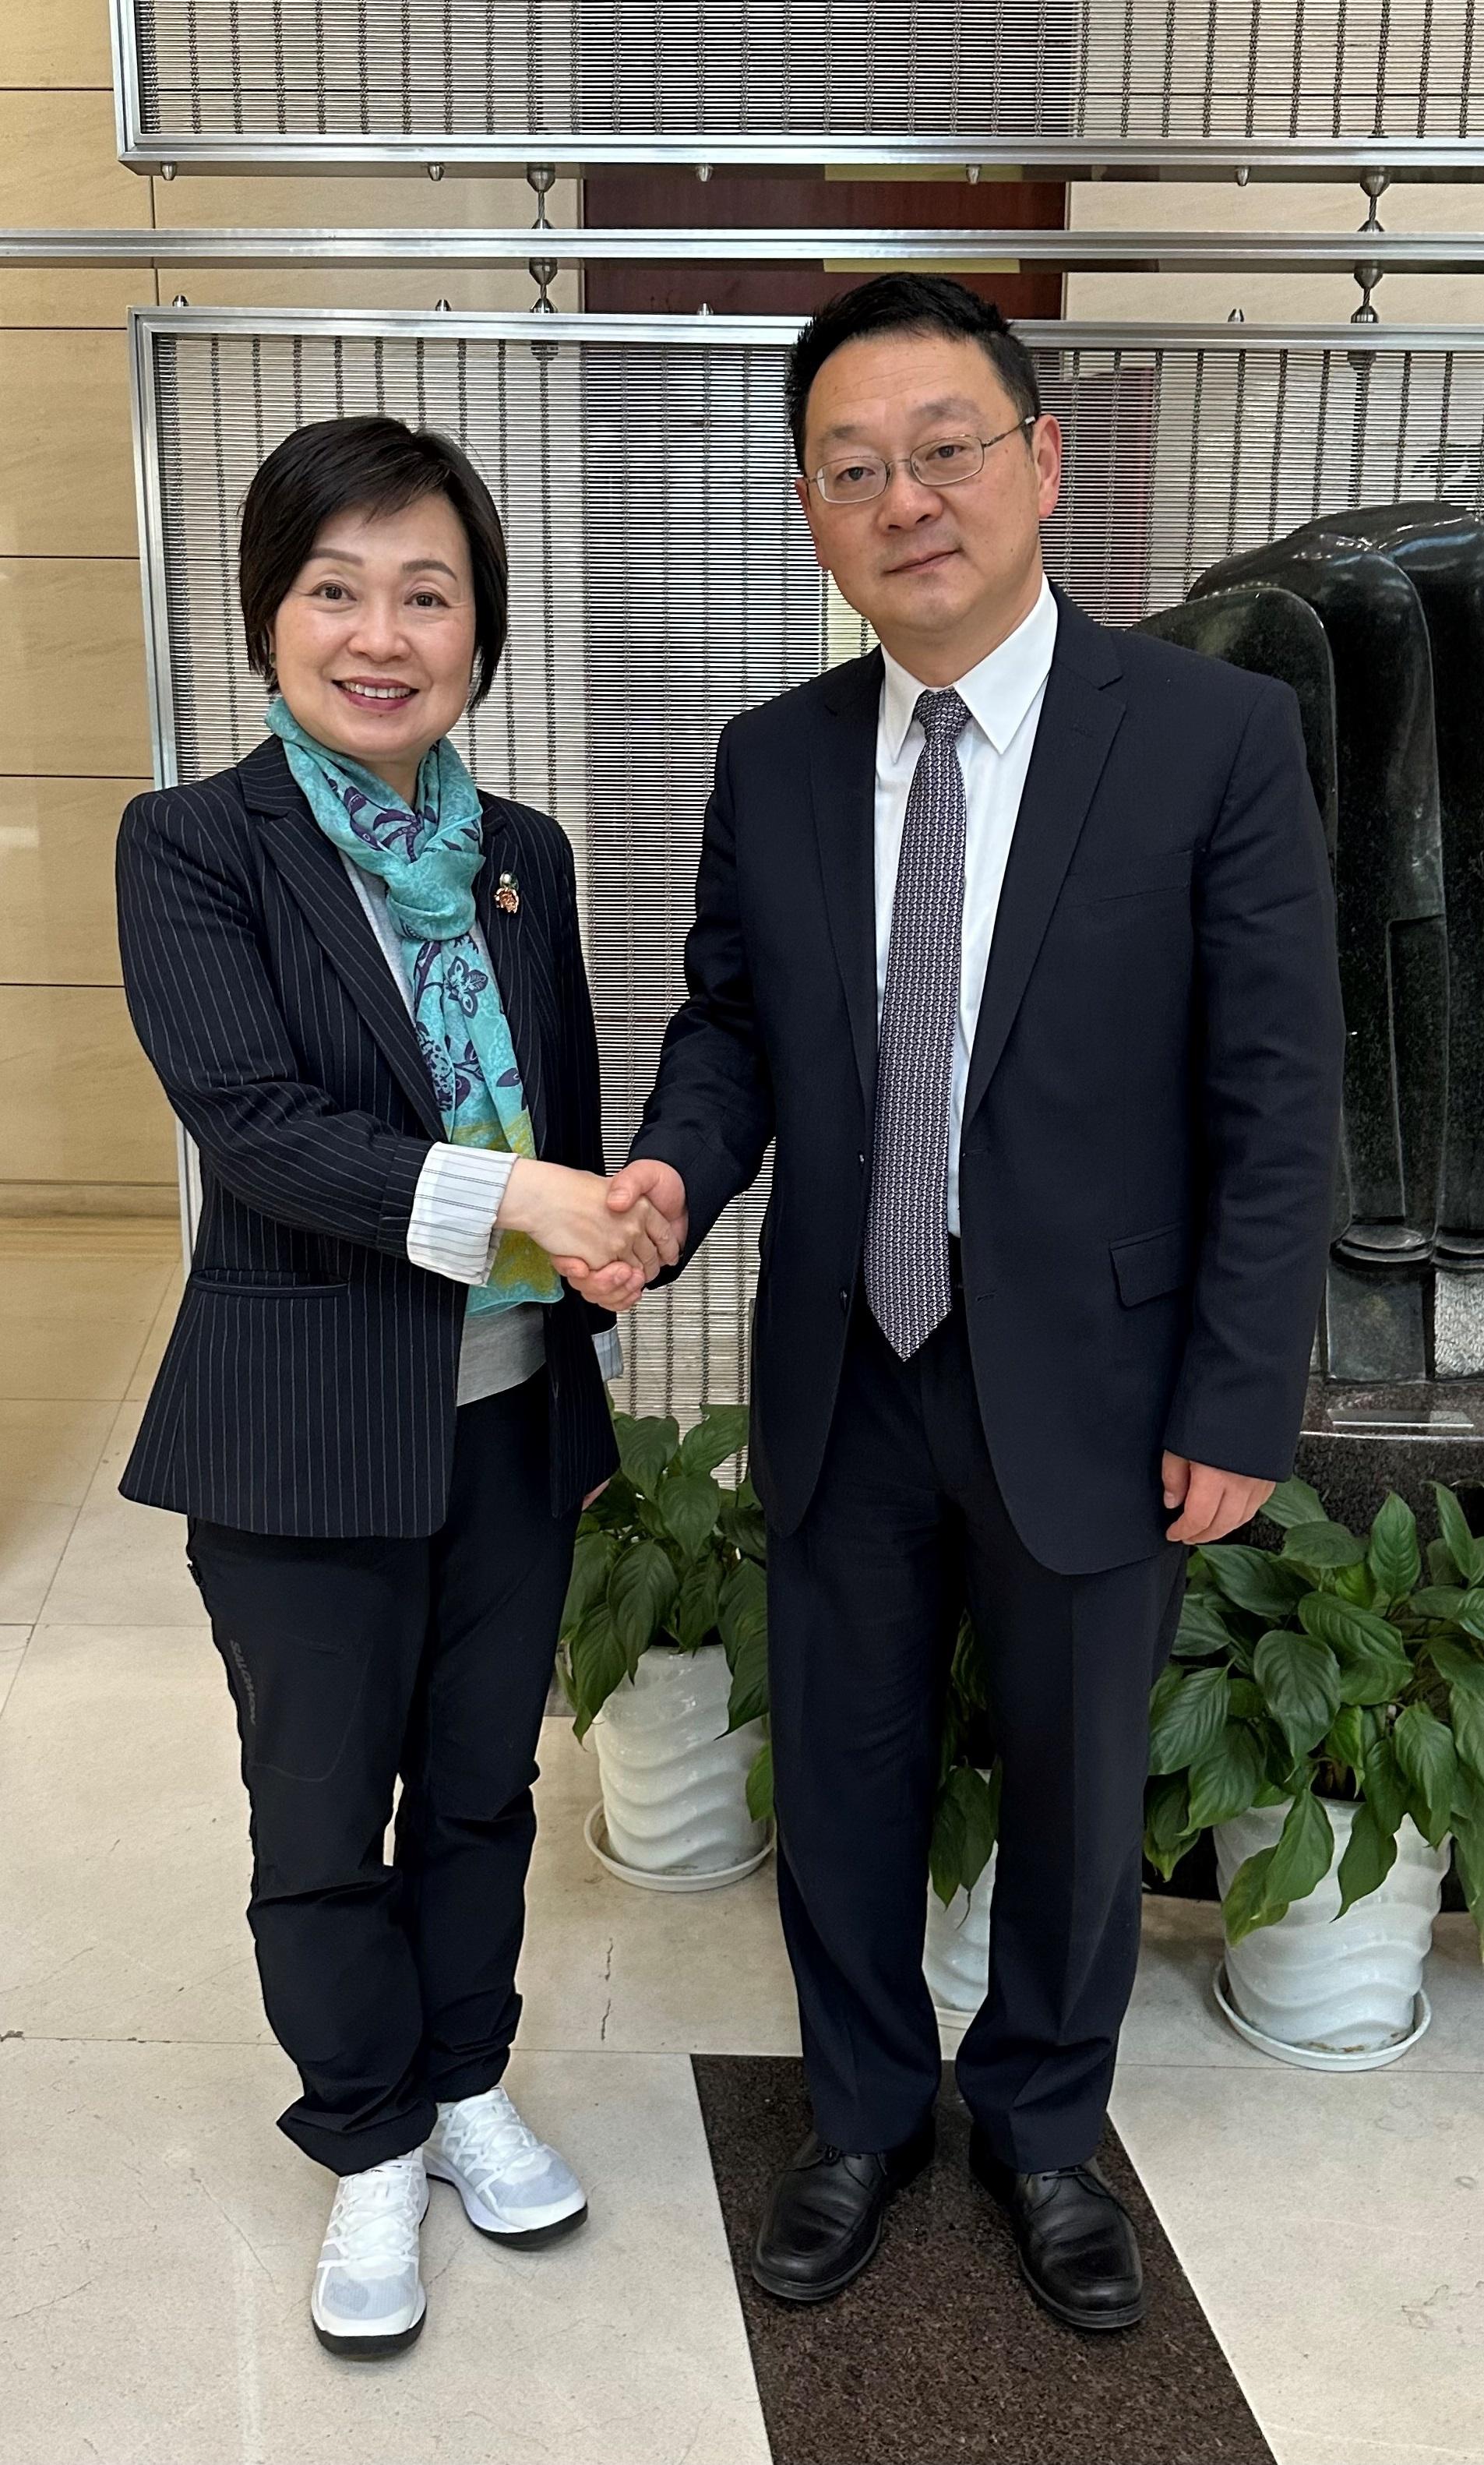 The Secretary for Education, Dr Choi Yuk-lin (left), today (April 13) calls on the Director General of Shanghai Municipal Education Commission, Mr Zhou Yaming (right), in Shanghai.